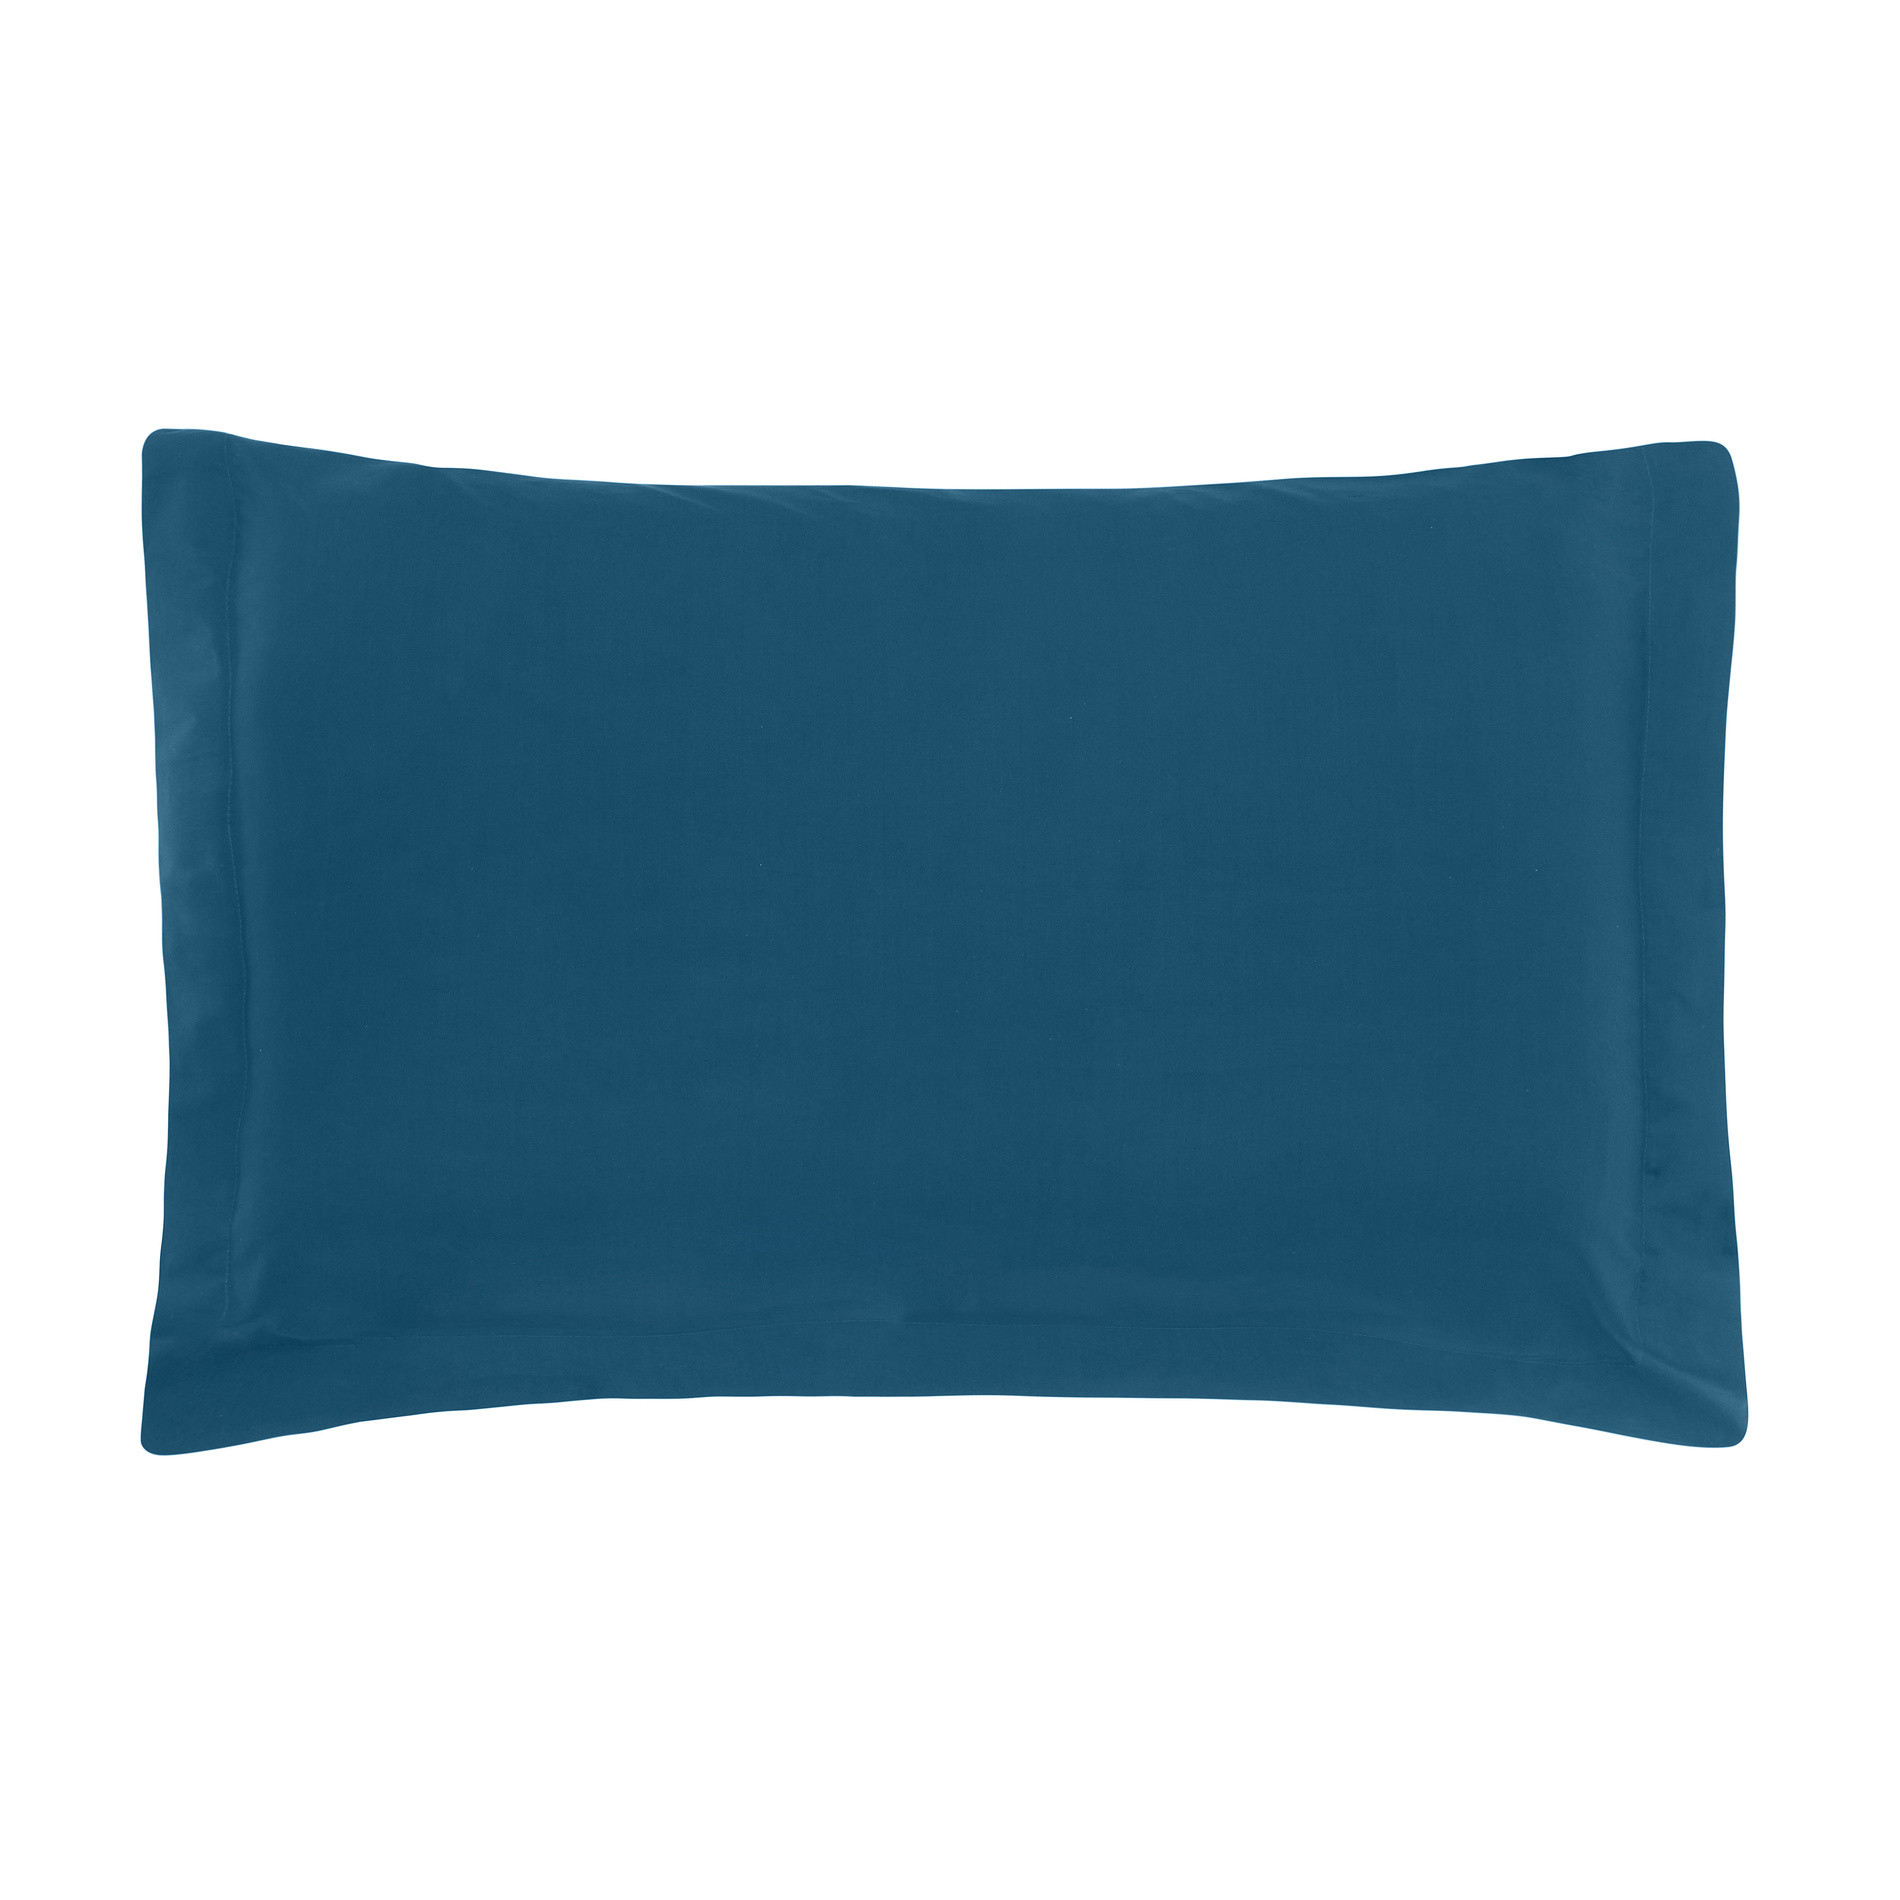 Zefiro solid colour pillowcase in percale., Petroleum , large image number 0